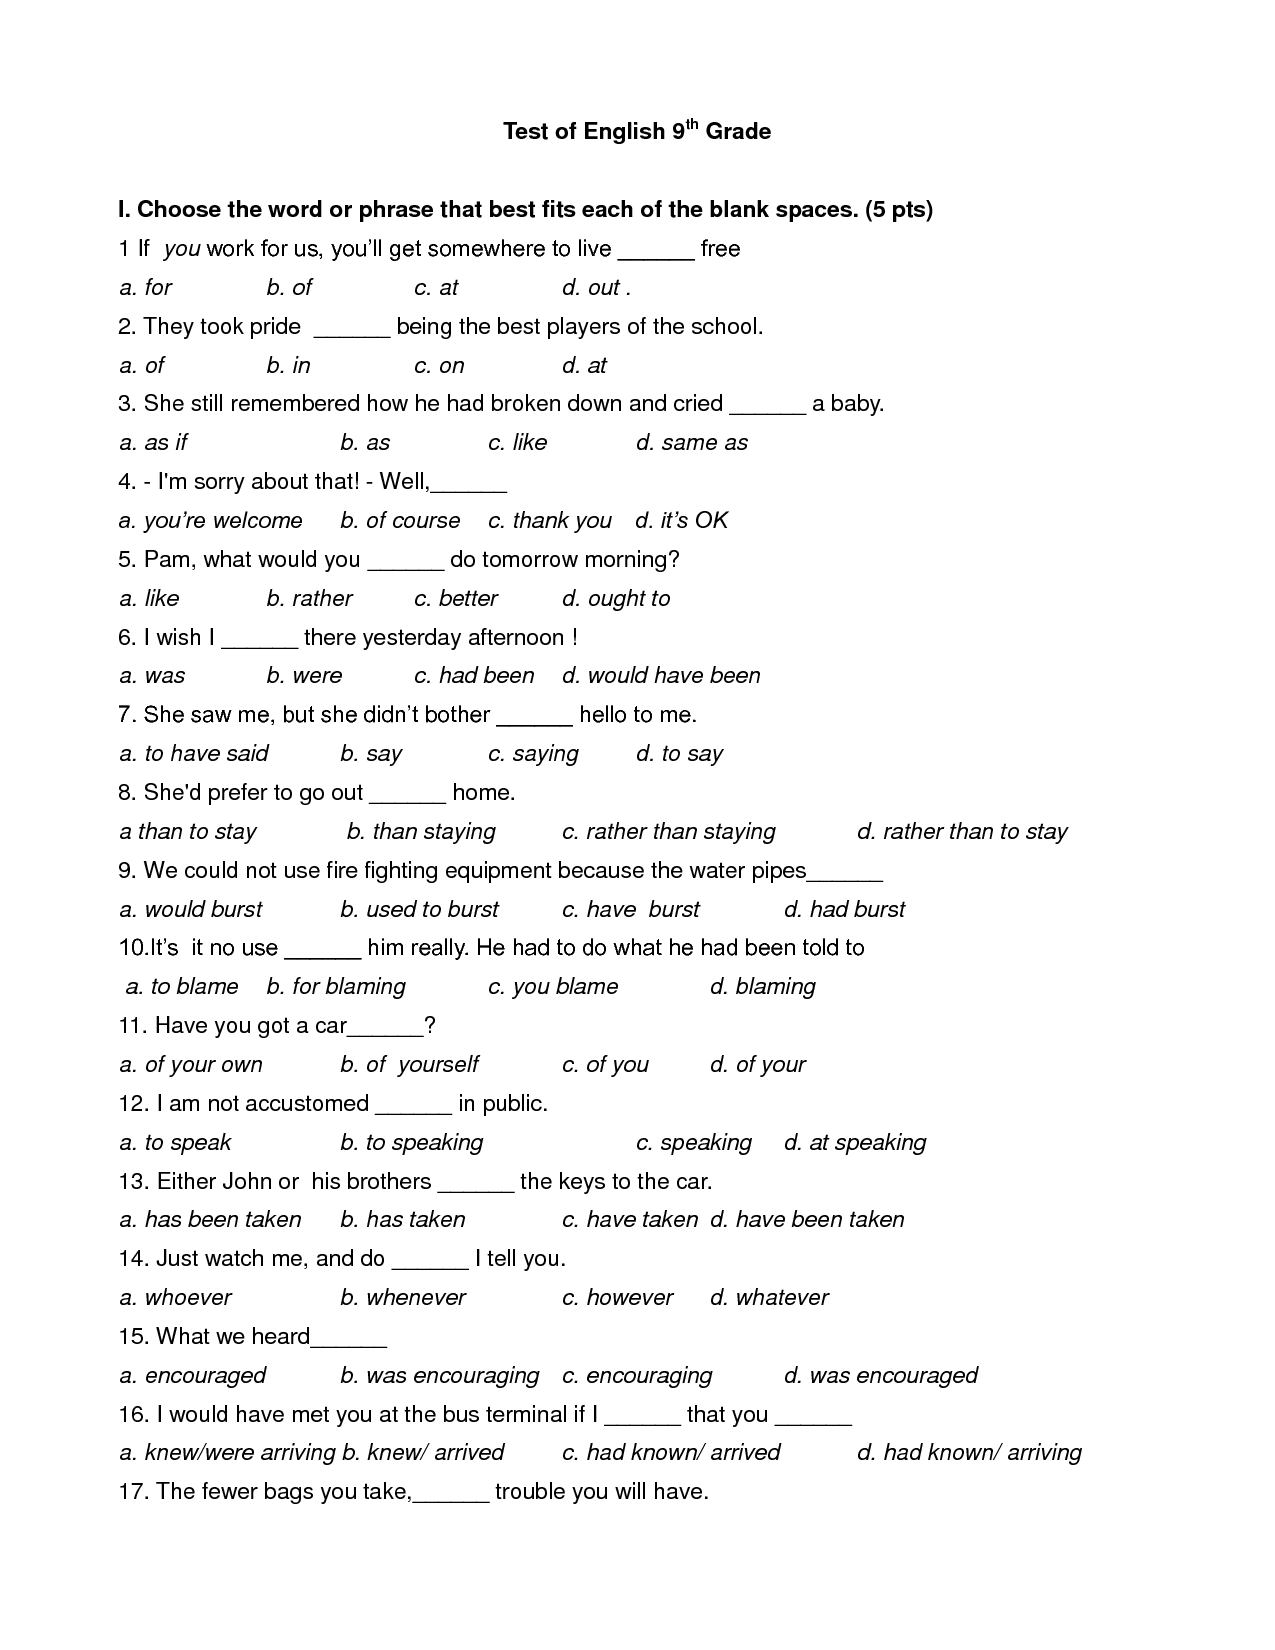 13 best images of english 9th grade vocabulary worksheets 9th grade